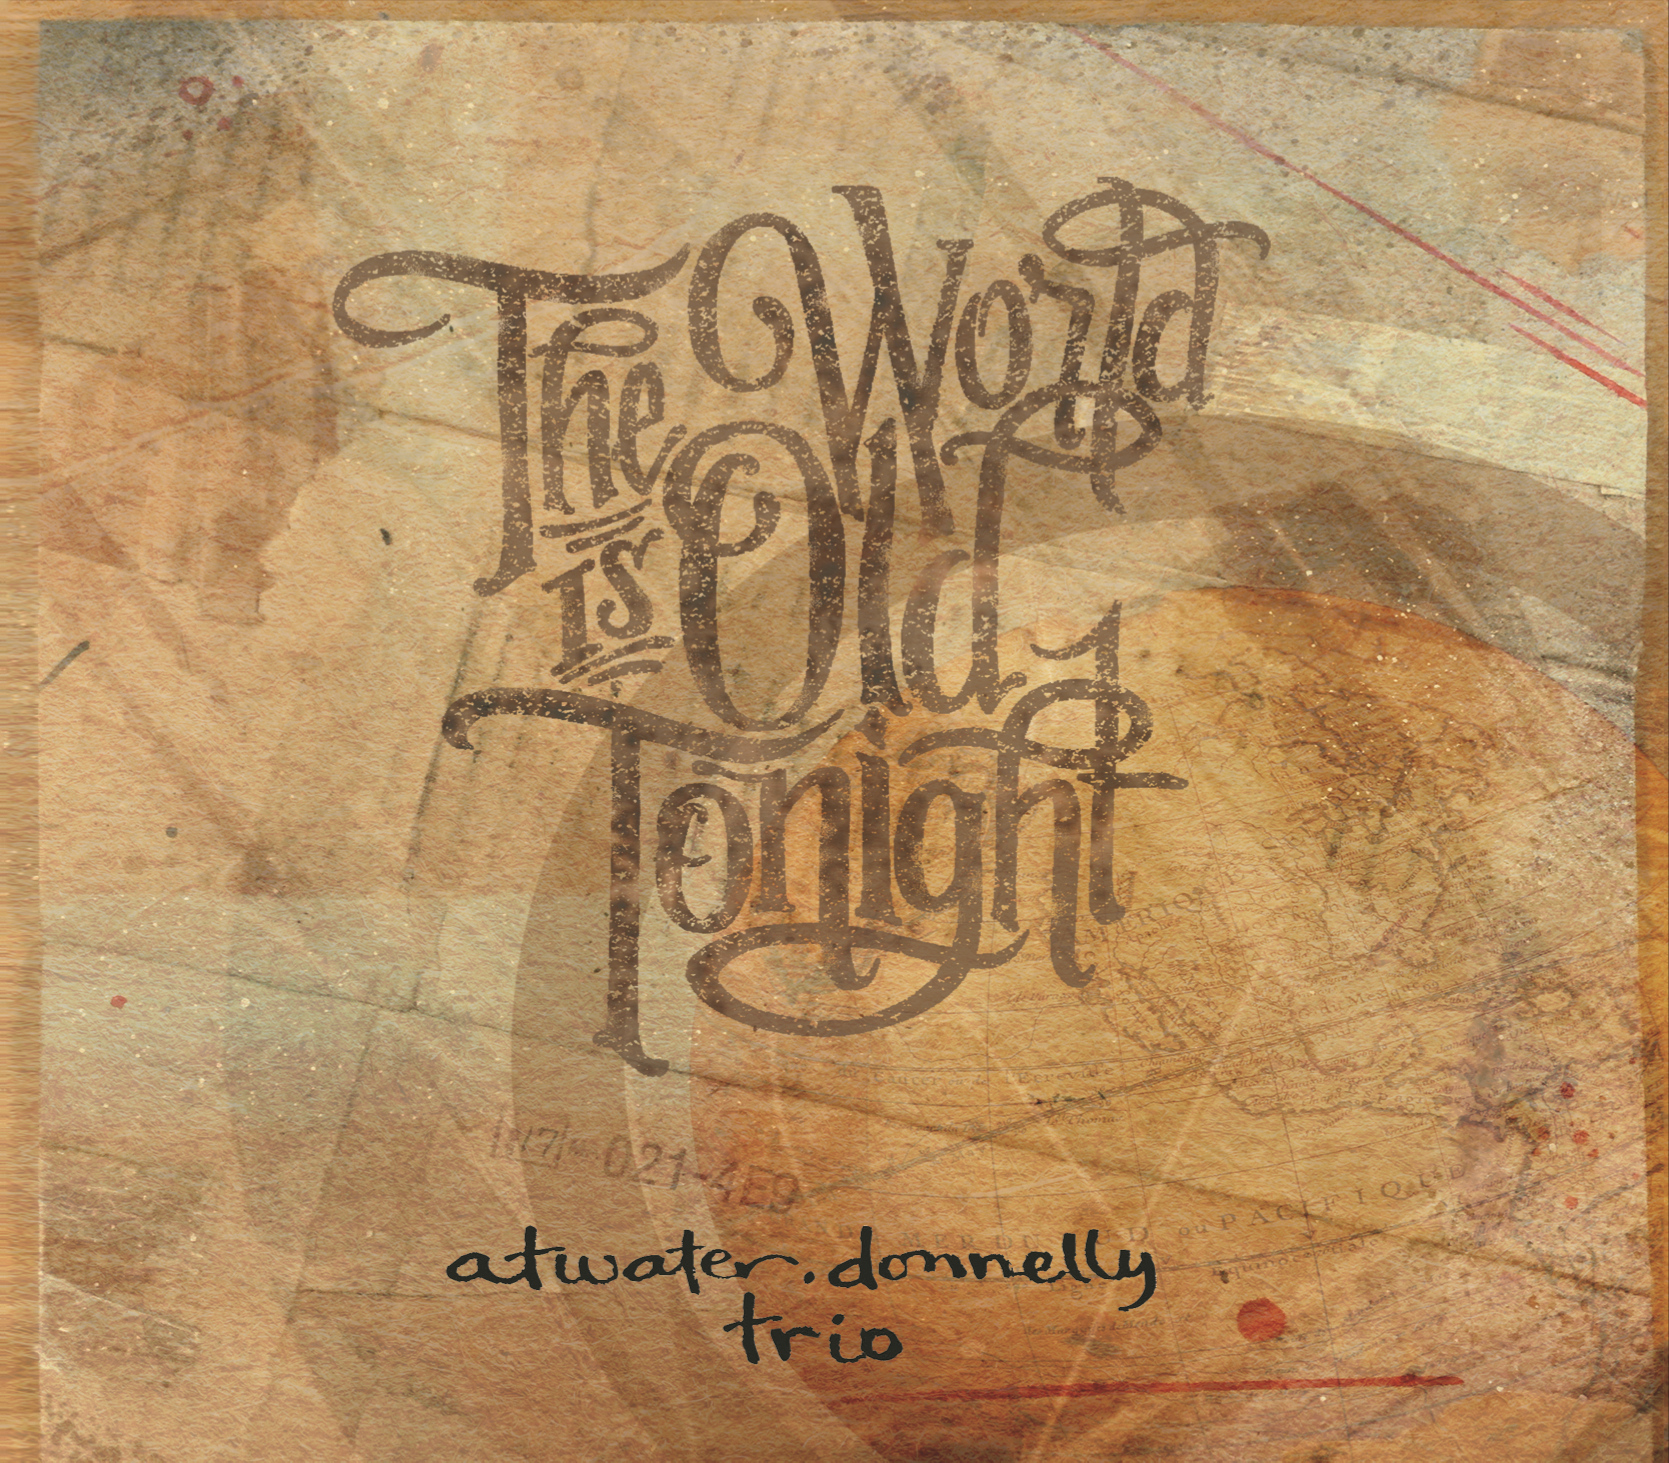 Atwater ~ Donnelly's CD The World is Old Tonight